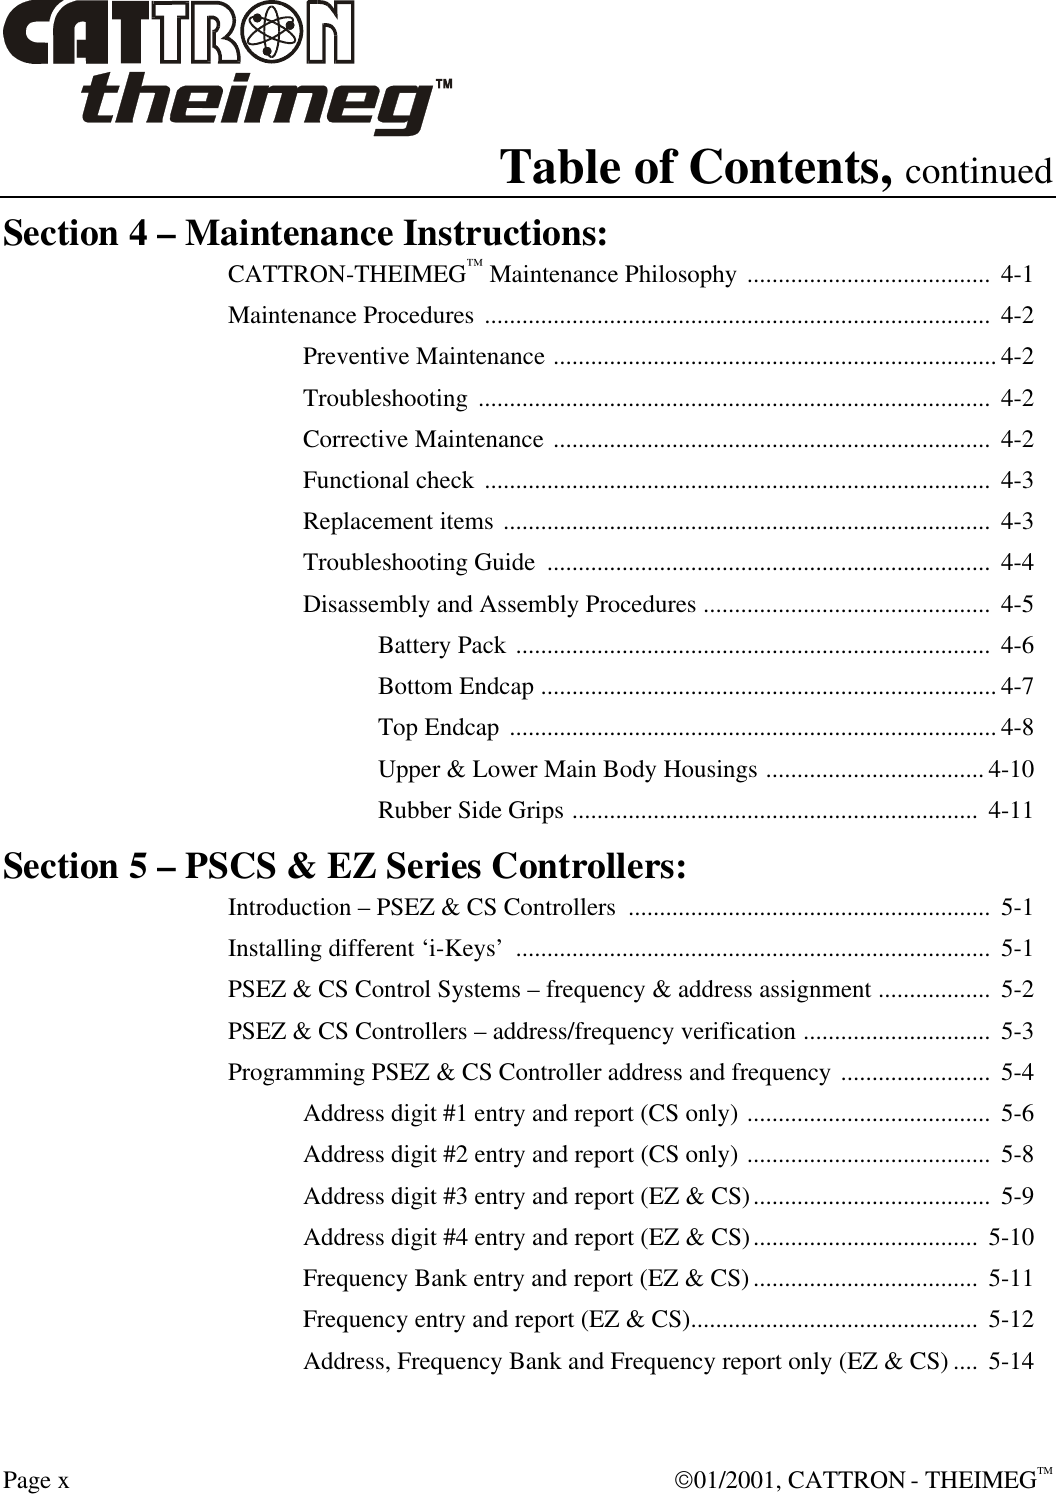  Page x  01/2001, CATTRON - THEIMEGTM Table of Contents, continued Section 4 – Maintenance Instructions: CATTRON-THEIMEG™ Maintenance Philosophy .......................................  4-1 Maintenance Procedures .................................................................................  4-2 Preventive Maintenance ....................................................................... 4-2 Troubleshooting ..................................................................................  4-2 Corrective Maintenance ......................................................................  4-2 Functional check .................................................................................  4-3 Replacement items ..............................................................................  4-3 Troubleshooting Guide  .......................................................................  4-4 Disassembly and Assembly Procedures ..............................................  4-5 Battery Pack ............................................................................  4-6 Bottom Endcap ......................................................................... 4-7 Top Endcap .............................................................................. 4-8 Upper &amp; Lower Main Body Housings ................................... 4-10 Rubber Side Grips .................................................................  4-11 Section 5 – PSCS &amp; EZ Series Controllers: Introduction – PSEZ &amp; CS Controllers  ..........................................................  5-1 Installing different ‘i-Keys’  ............................................................................  5-1 PSEZ &amp; CS Control Systems – frequency &amp; address assignment ..................  5-2 PSEZ &amp; CS Controllers – address/frequency verification ..............................  5-3 Programming PSEZ &amp; CS Controller address and frequency ........................  5-4 Address digit #1 entry and report (CS only) .......................................  5-6 Address digit #2 entry and report (CS only) .......................................  5-8 Address digit #3 entry and report (EZ &amp; CS)......................................  5-9 Address digit #4 entry and report (EZ &amp; CS)....................................  5-10 Frequency Bank entry and report (EZ &amp; CS)....................................  5-11 Frequency entry and report (EZ &amp; CS)..............................................  5-12 Address, Frequency Bank and Frequency report only (EZ &amp; CS) ....  5-14 